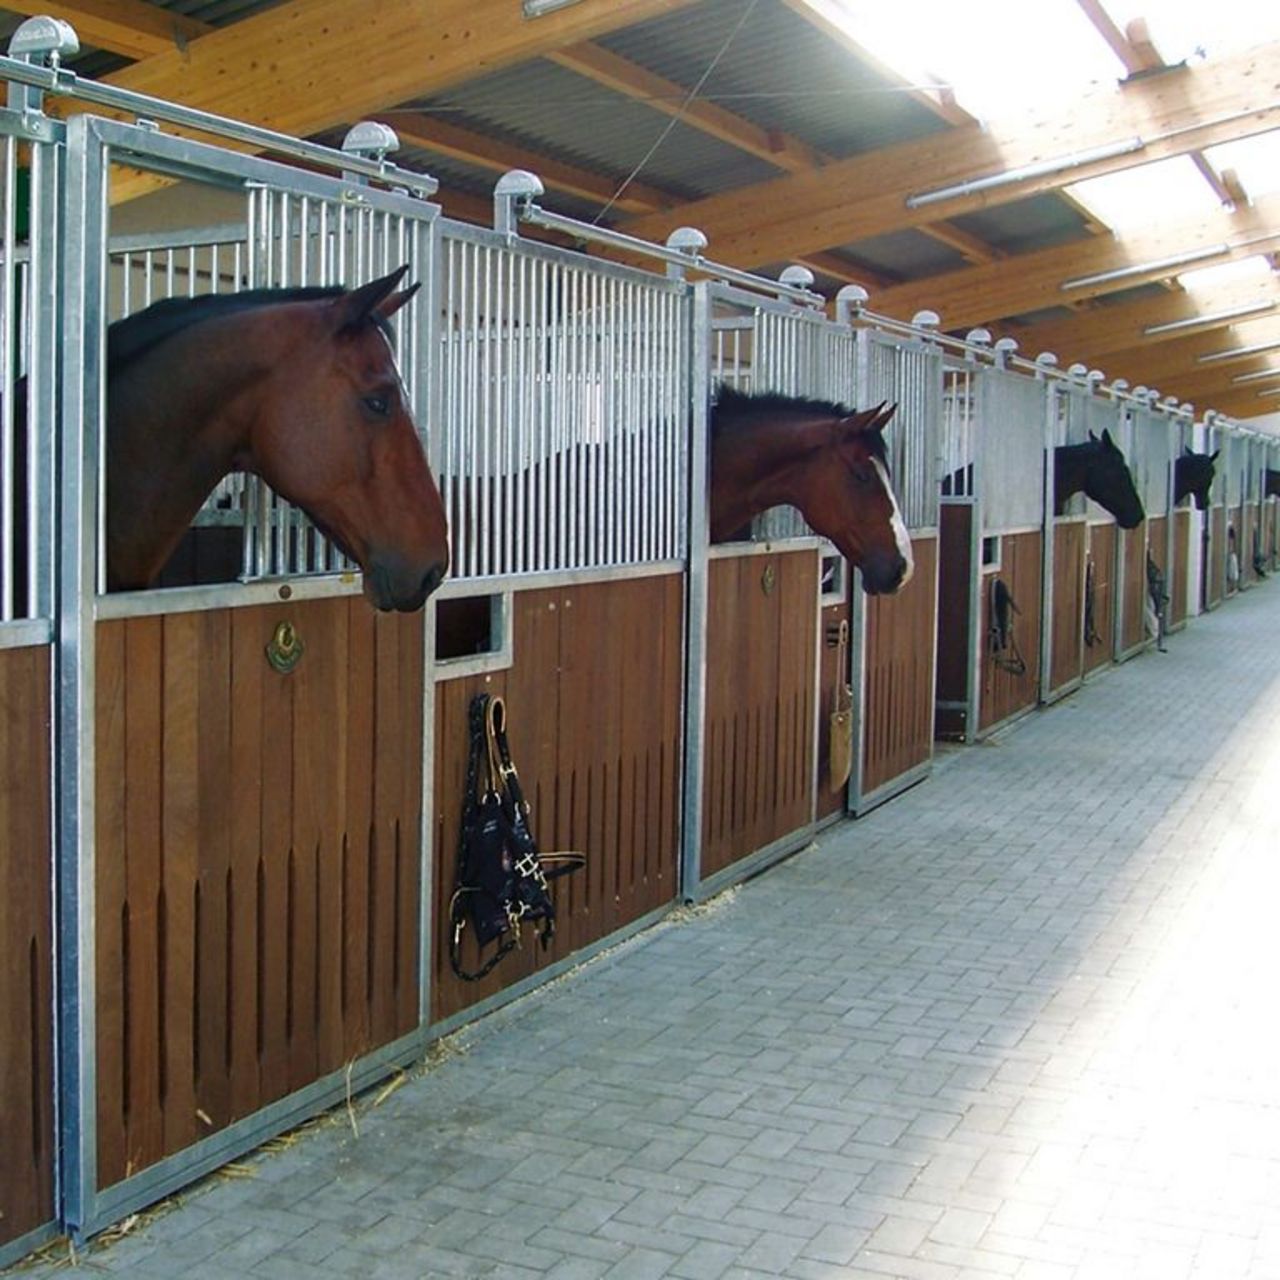 Stable with horsebox